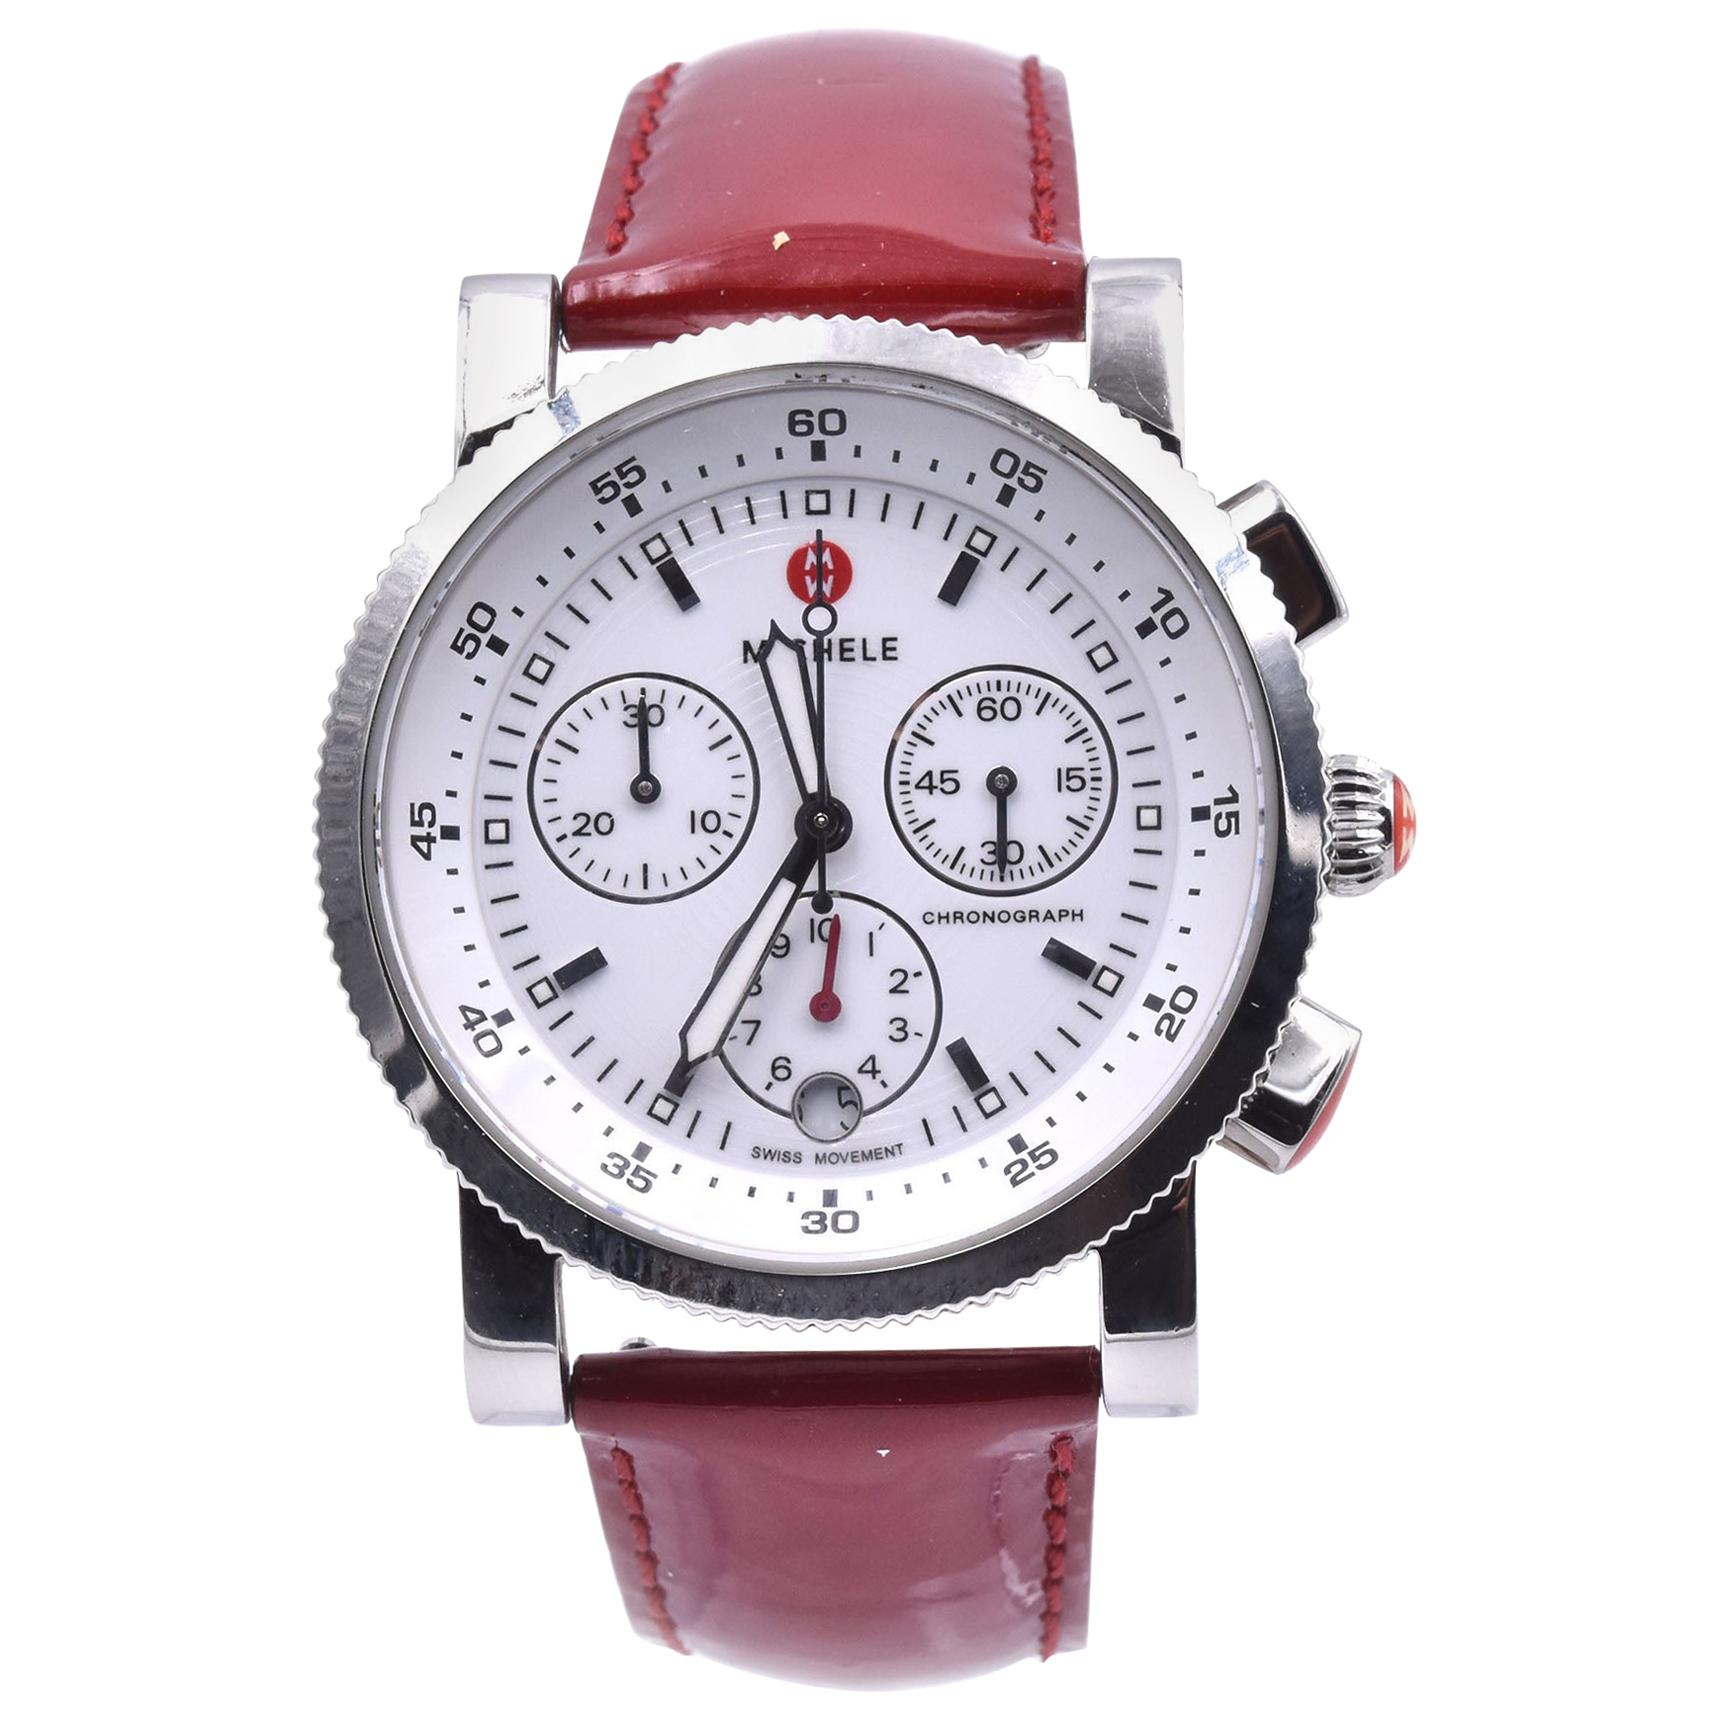 Michele Stainless Steel Sport Sail Watch